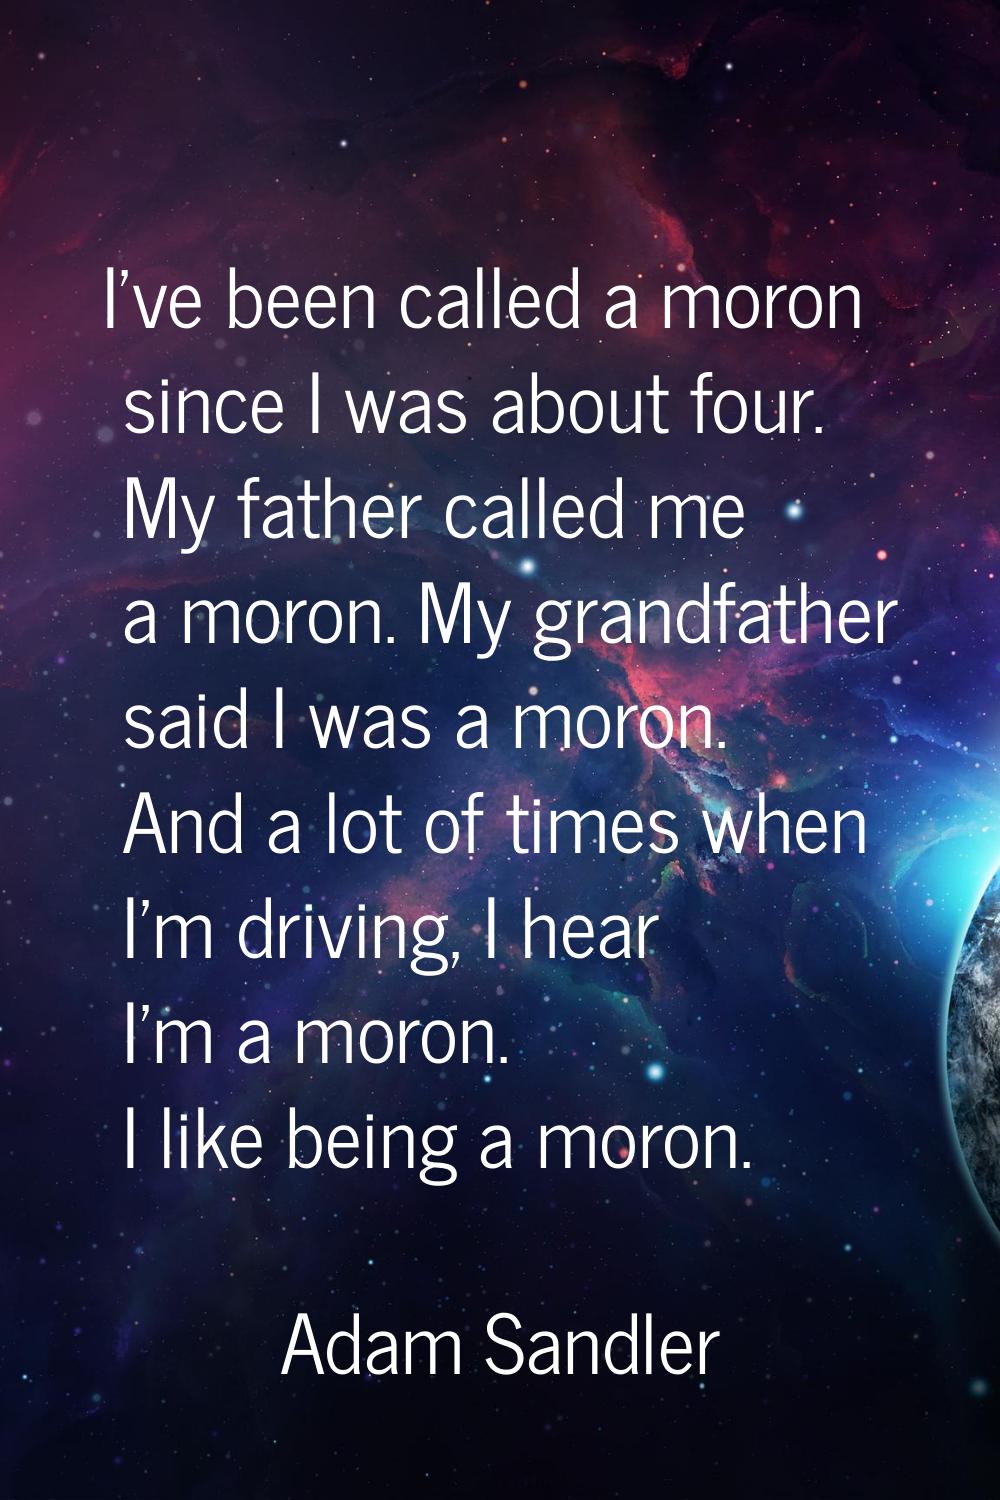 I've been called a moron since I was about four. My father called me a moron. My grandfather said I